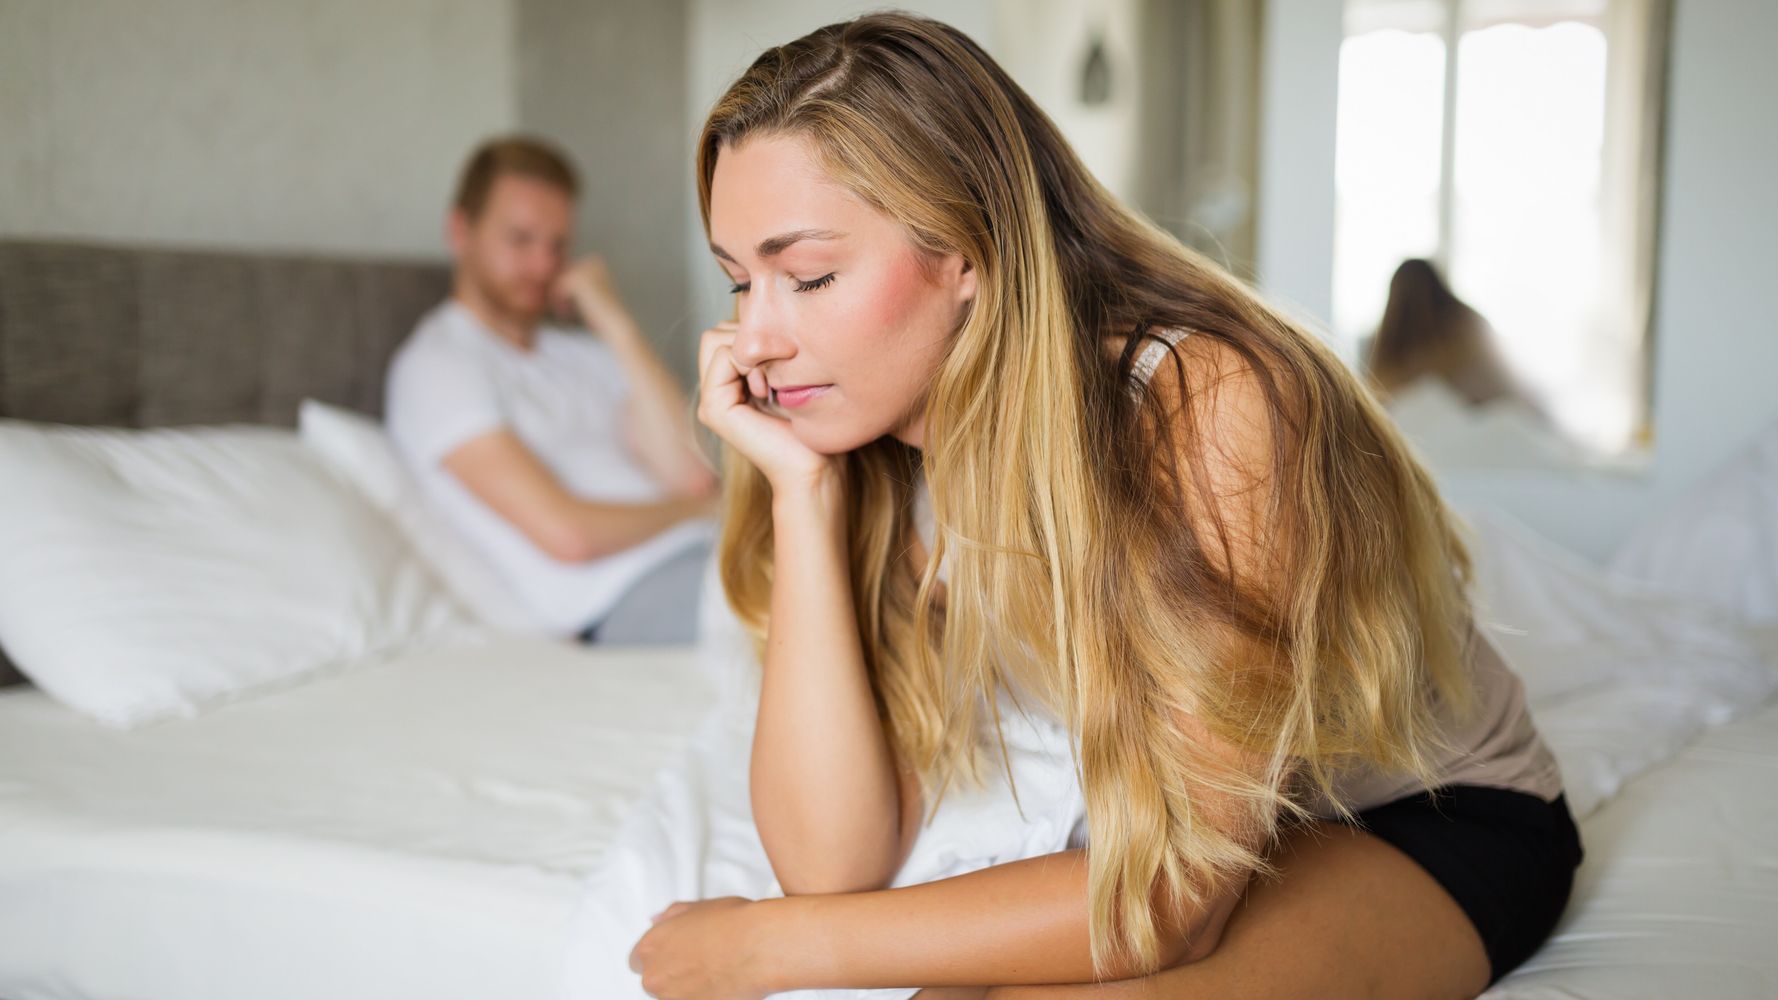 The Intimacy Gap: Why Women Lose Interest, by Consciously Awake